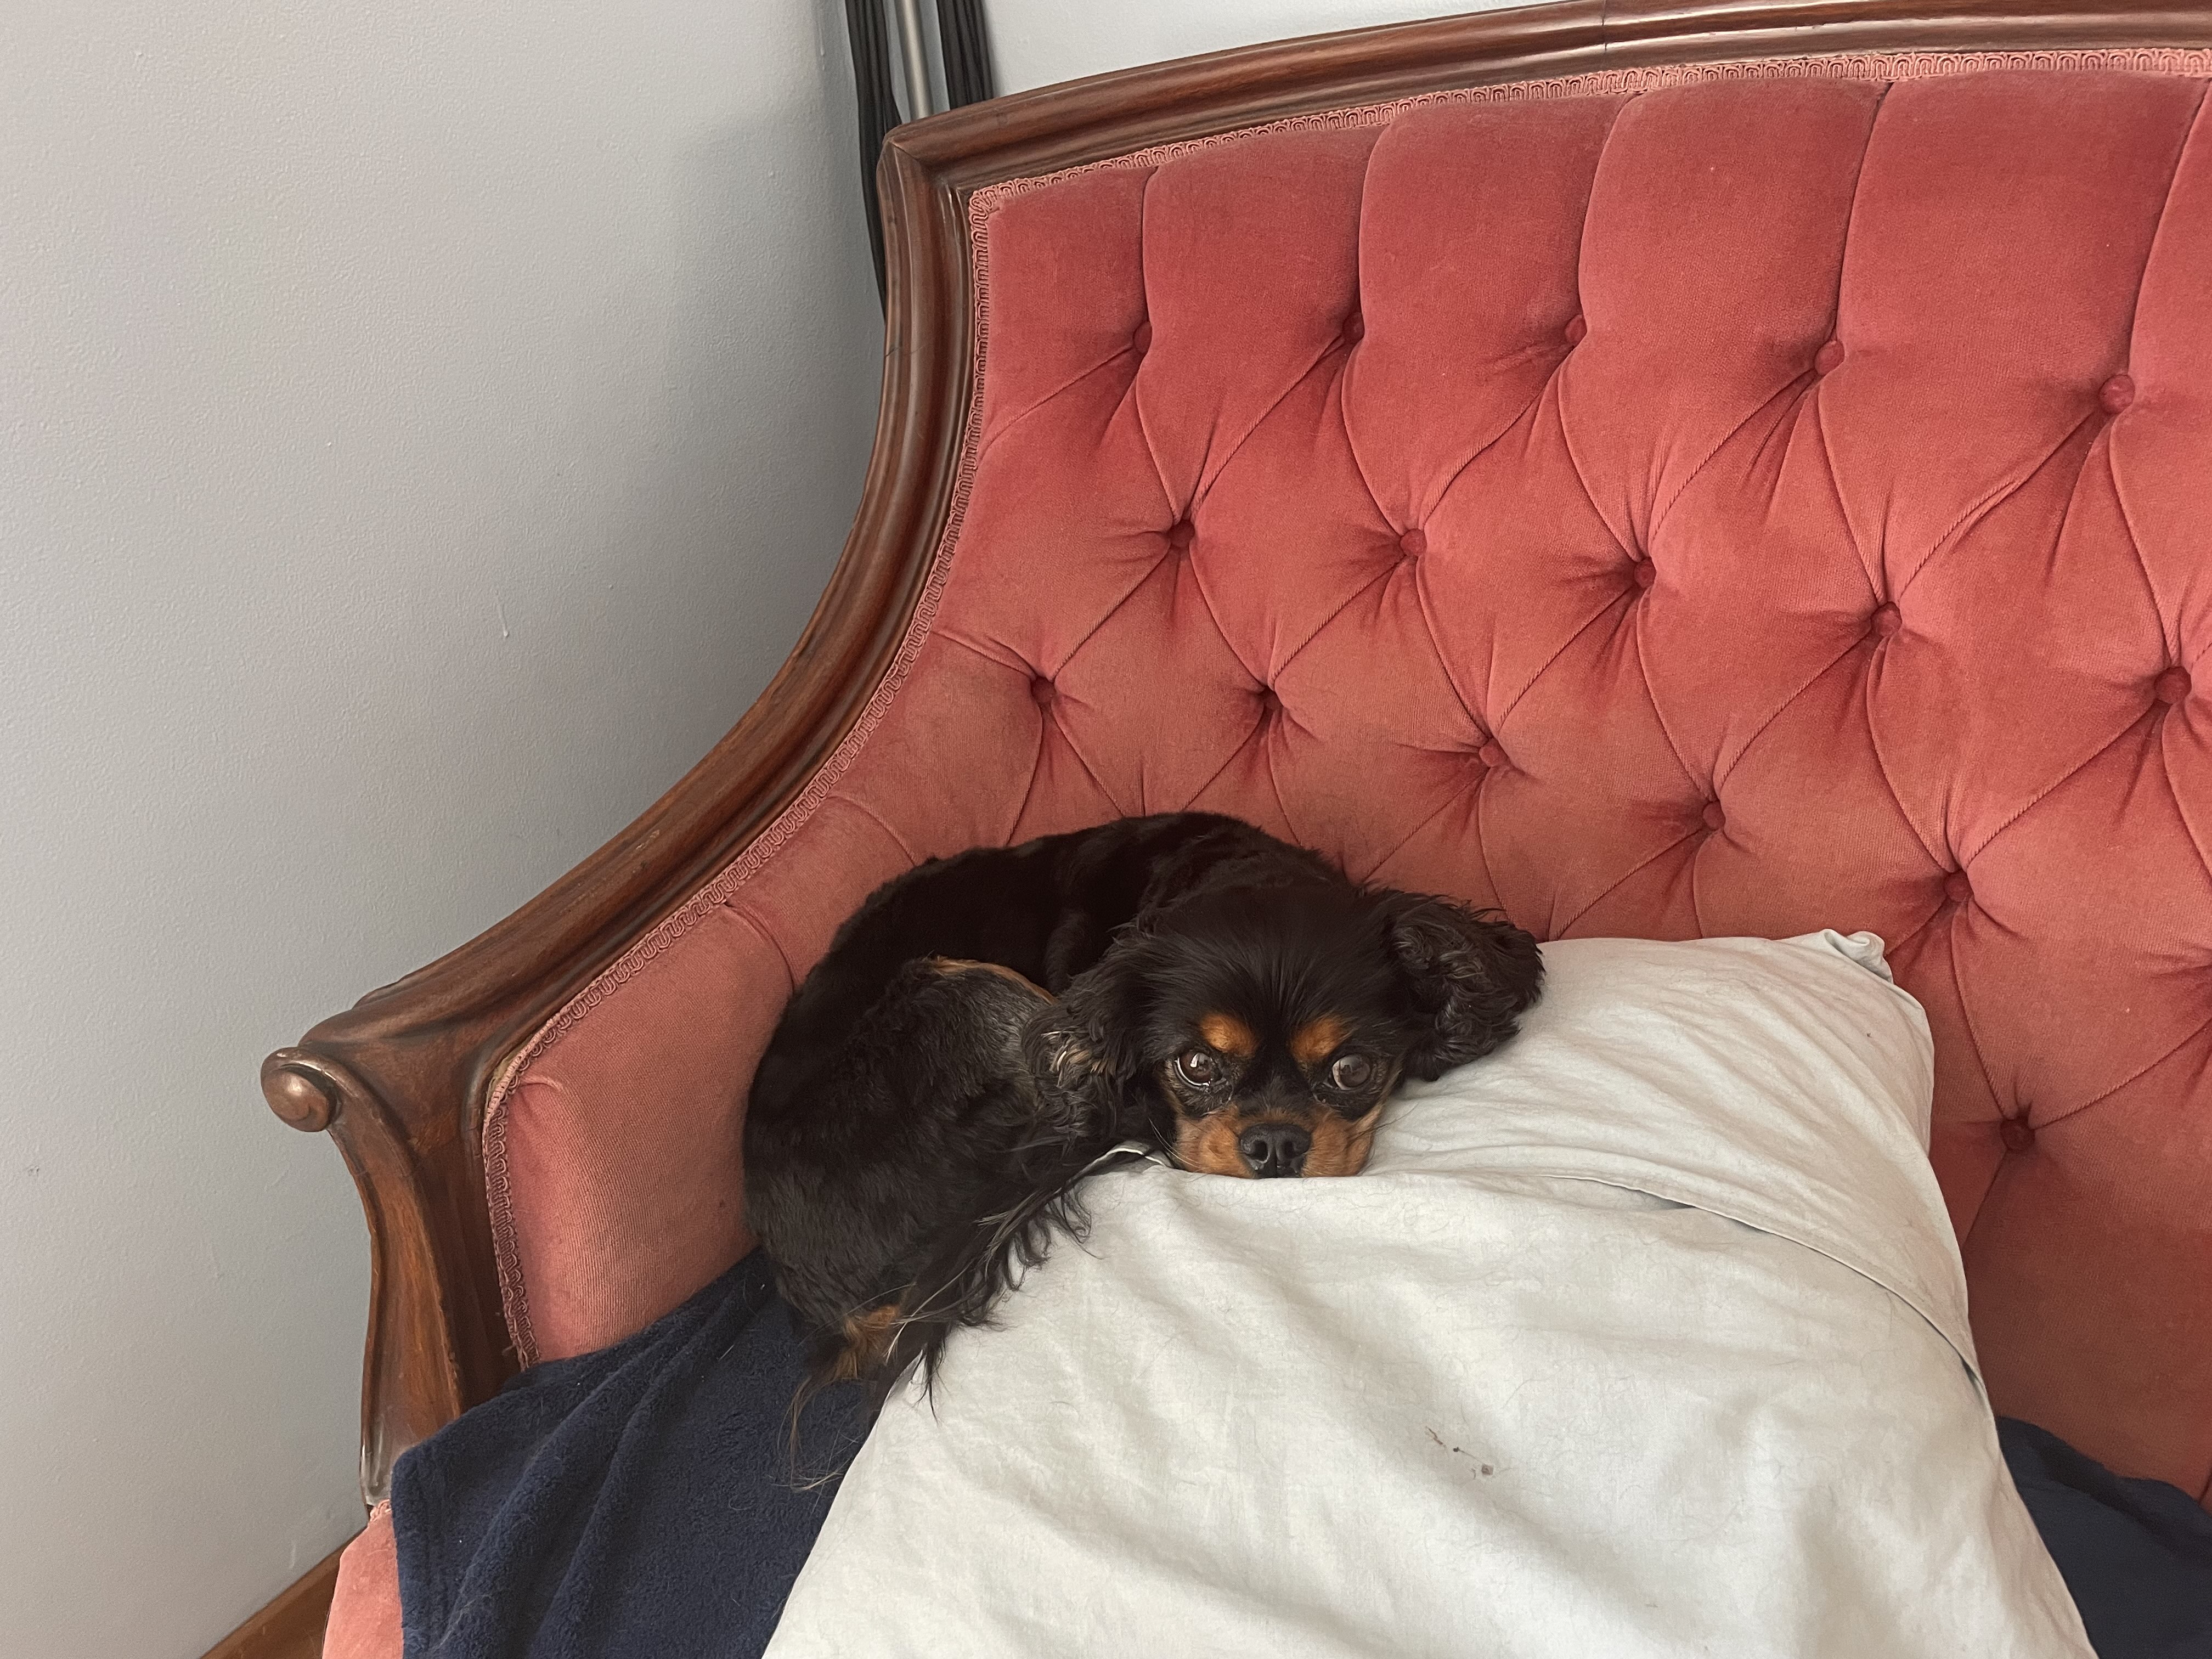 An image of a small, black spaniel curled up on a pink couch.